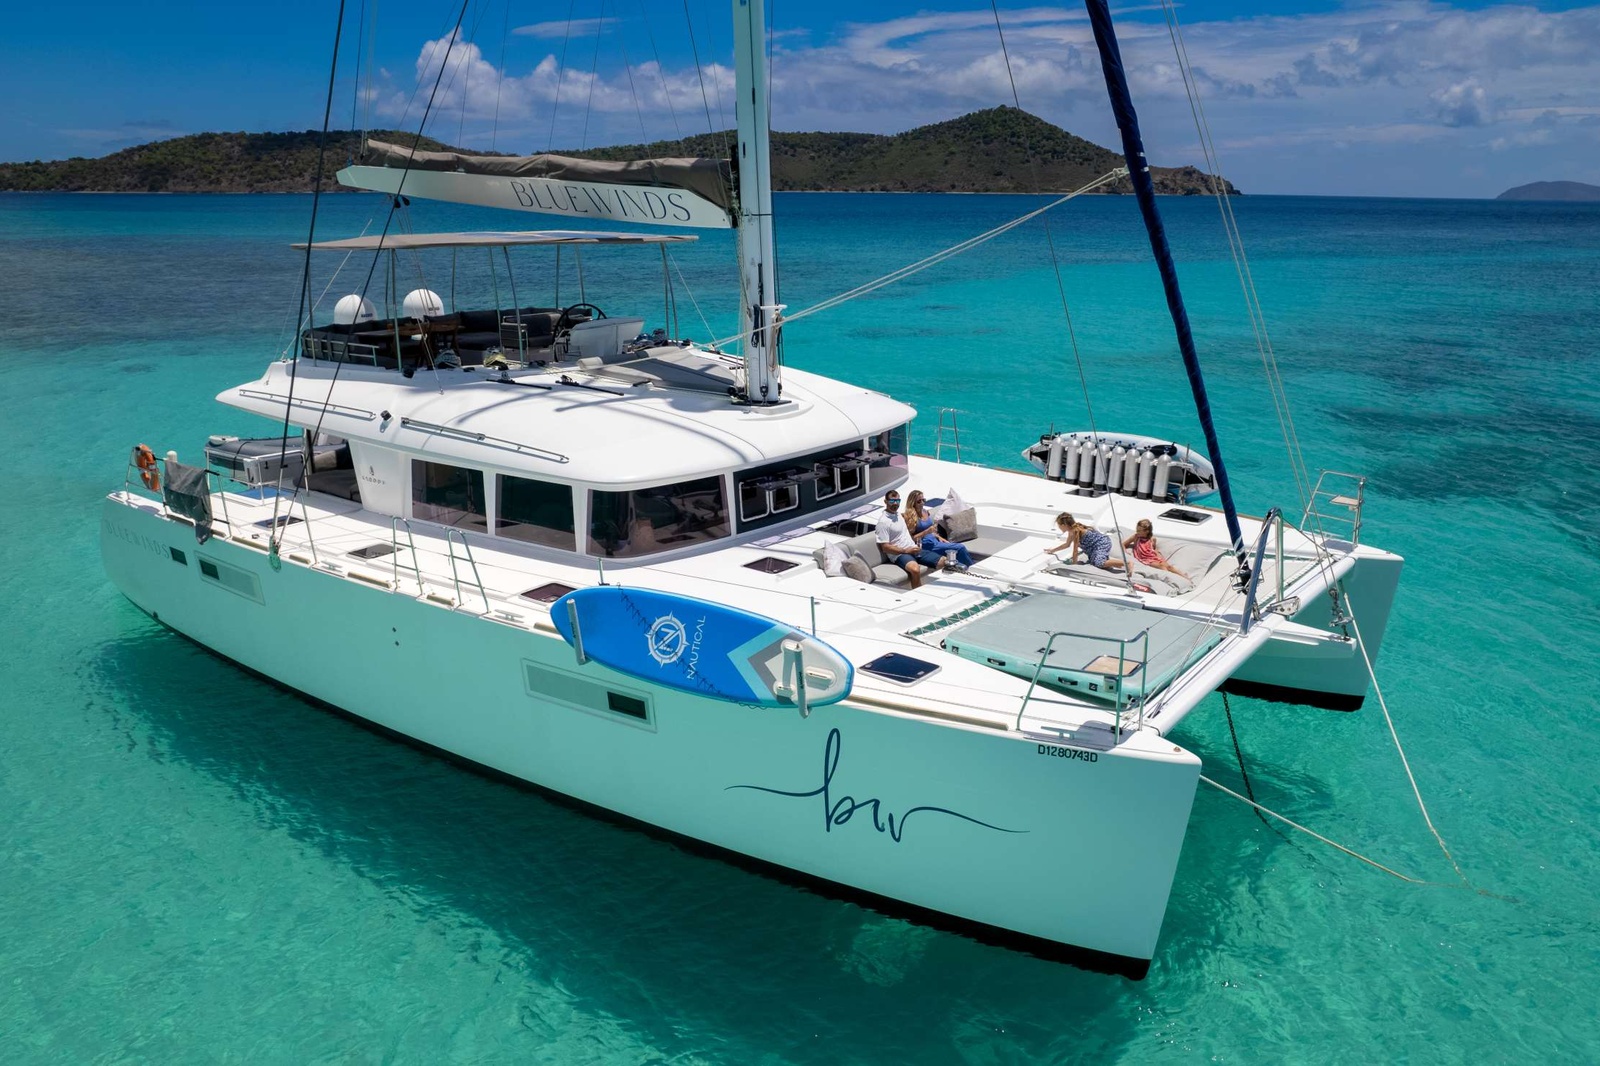 Bluewinds is the perfect platform for experiencing the majesty of the Caribbean! An ongoing 2022/23 refit brings all new interior and exterior decor, new generators, water maker, tender and a 